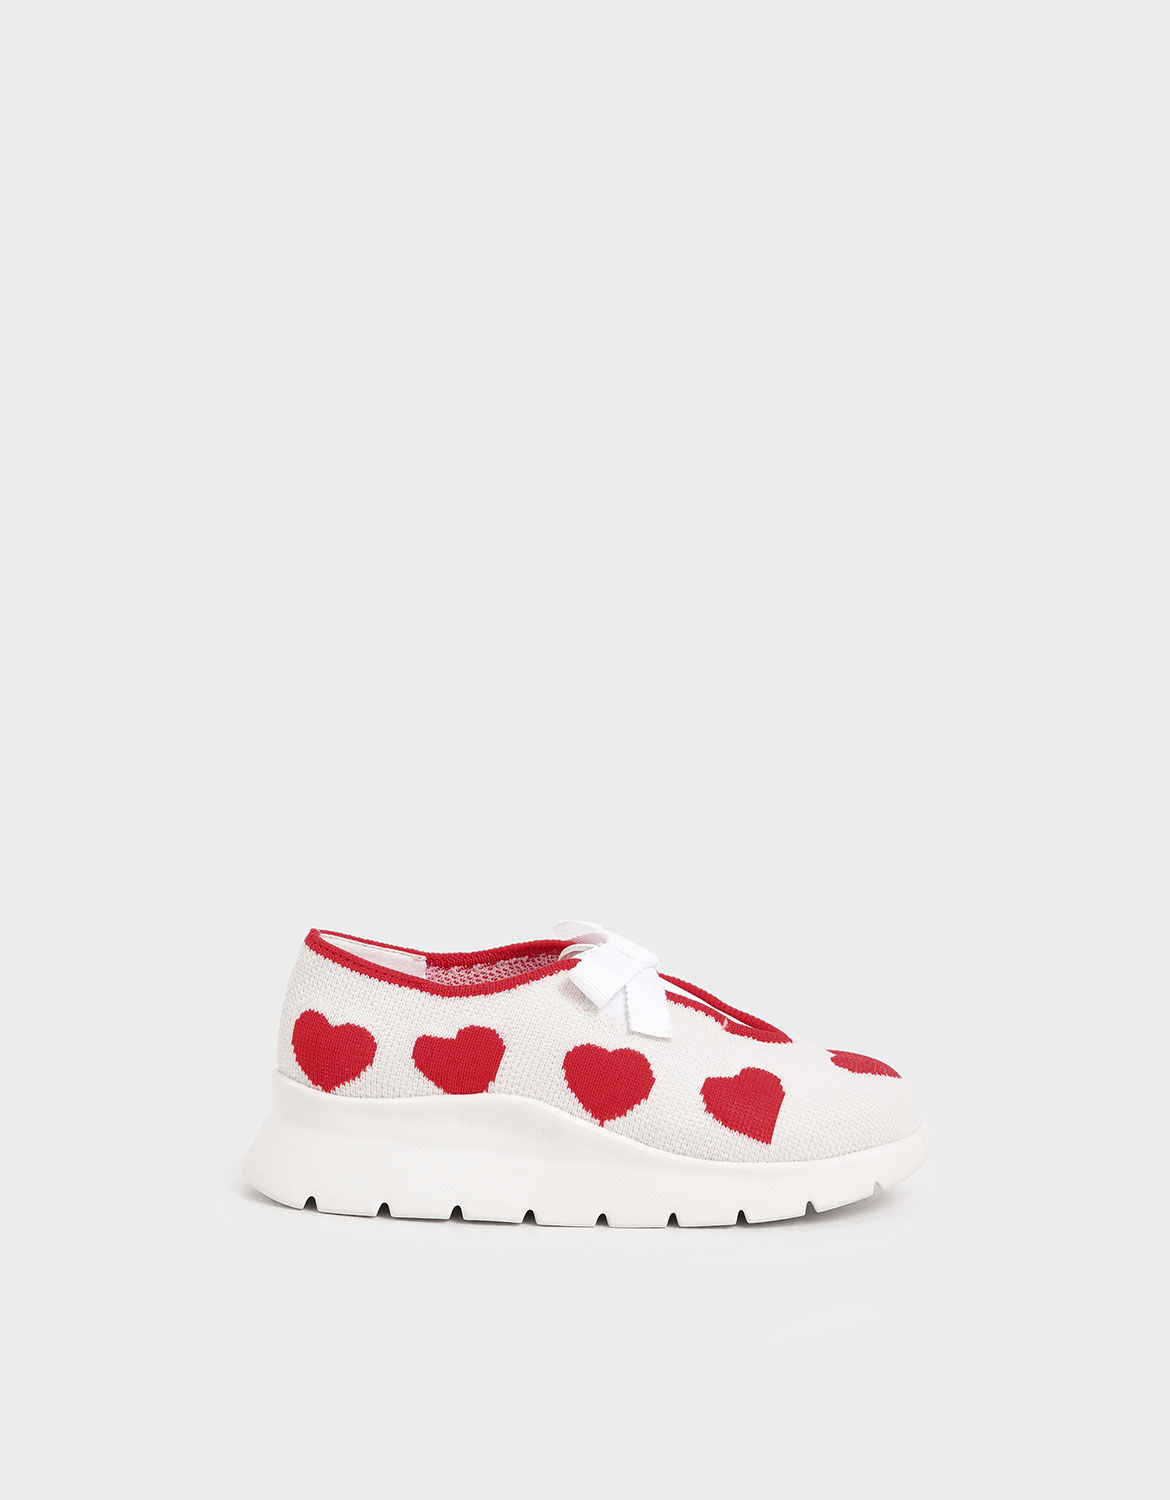 charles and keith baby shoes